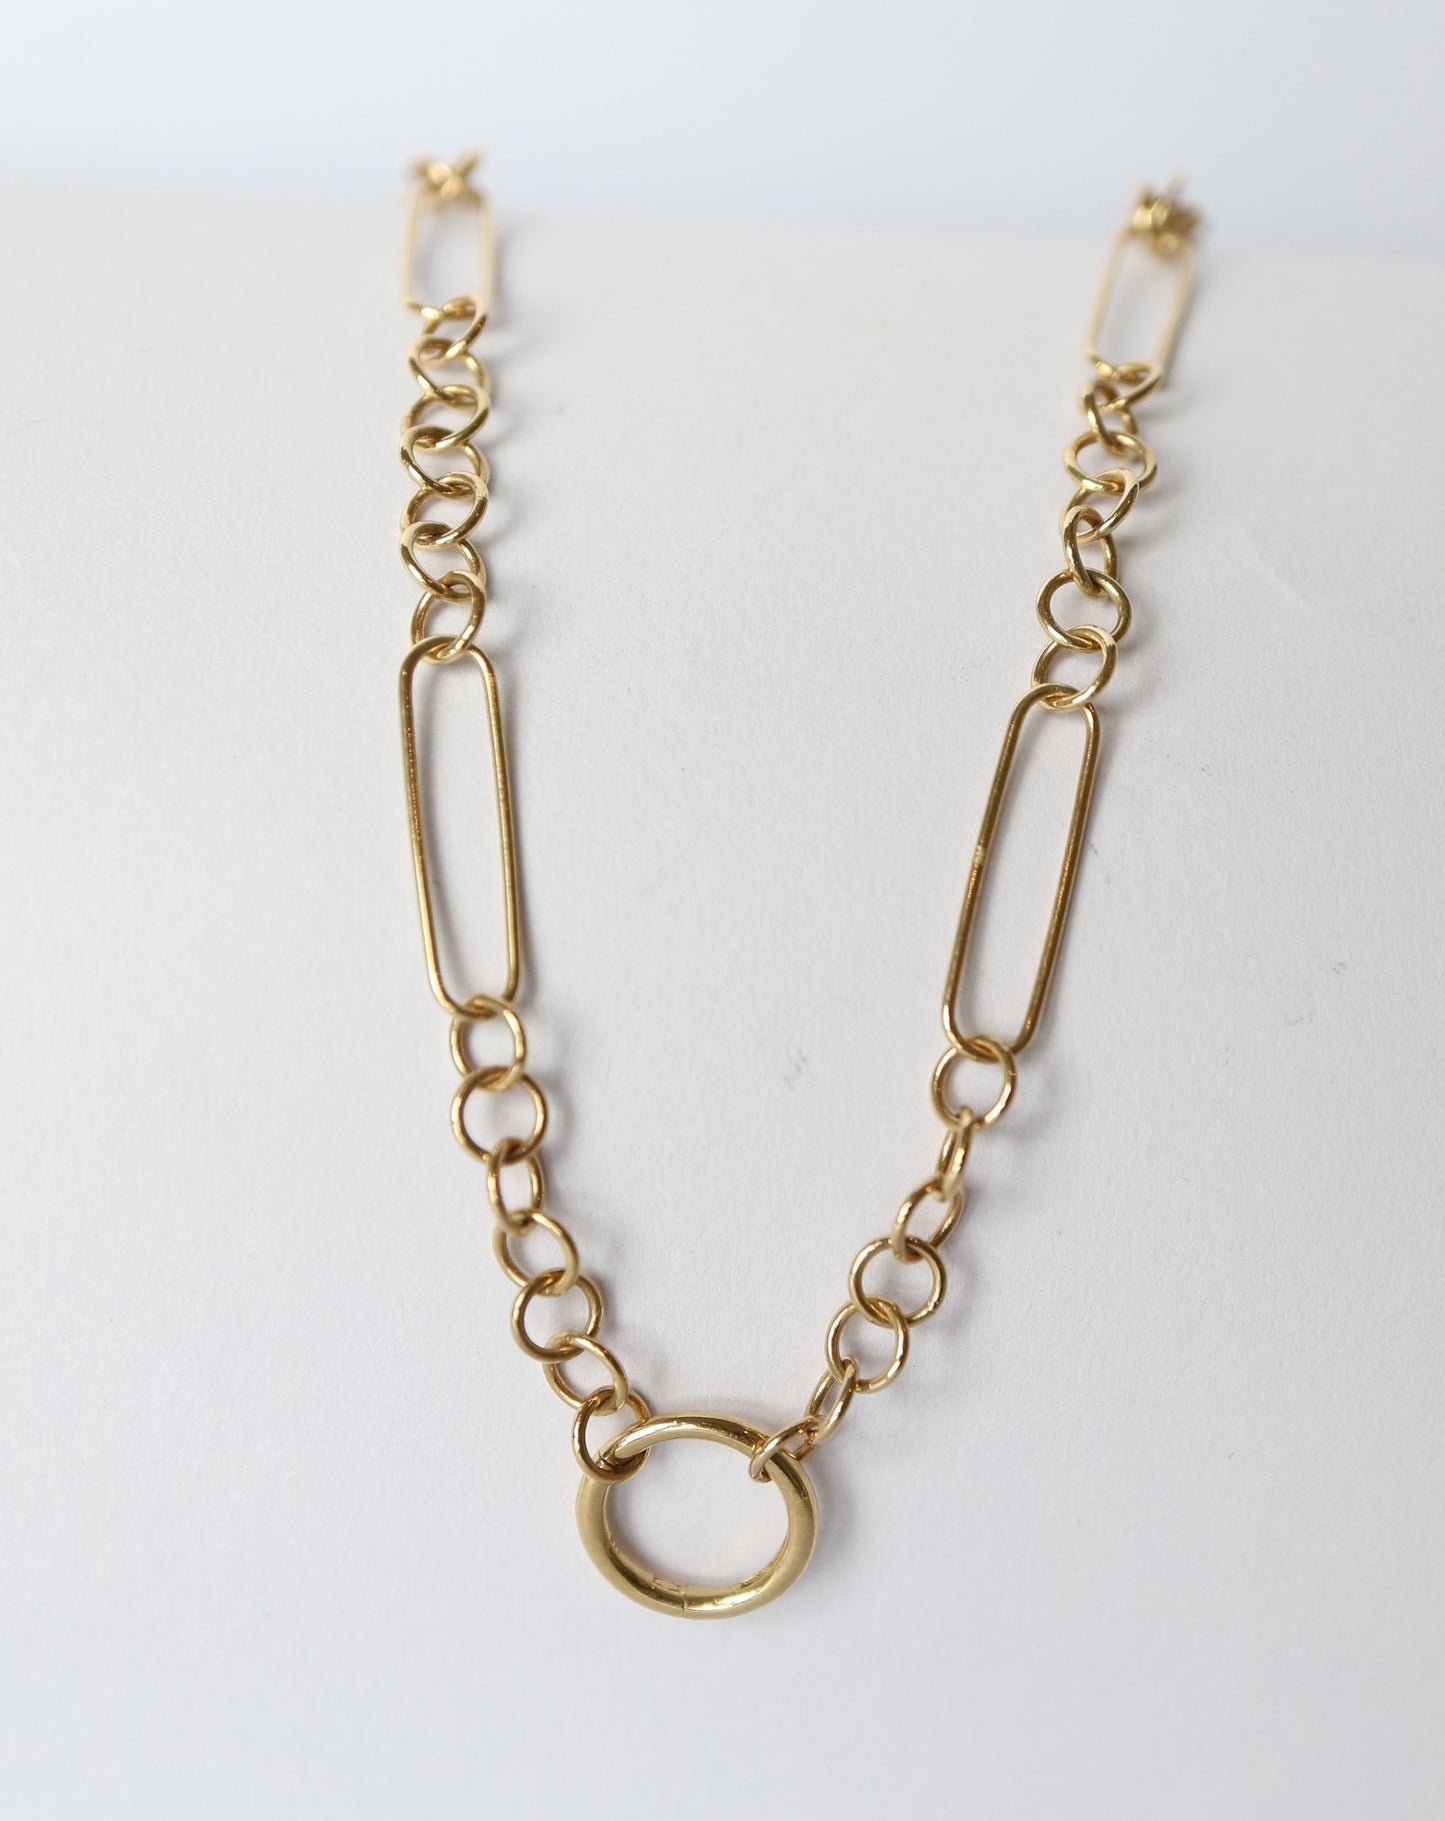 9ct gold Mixed Links Chain with Charm Clip Clasp